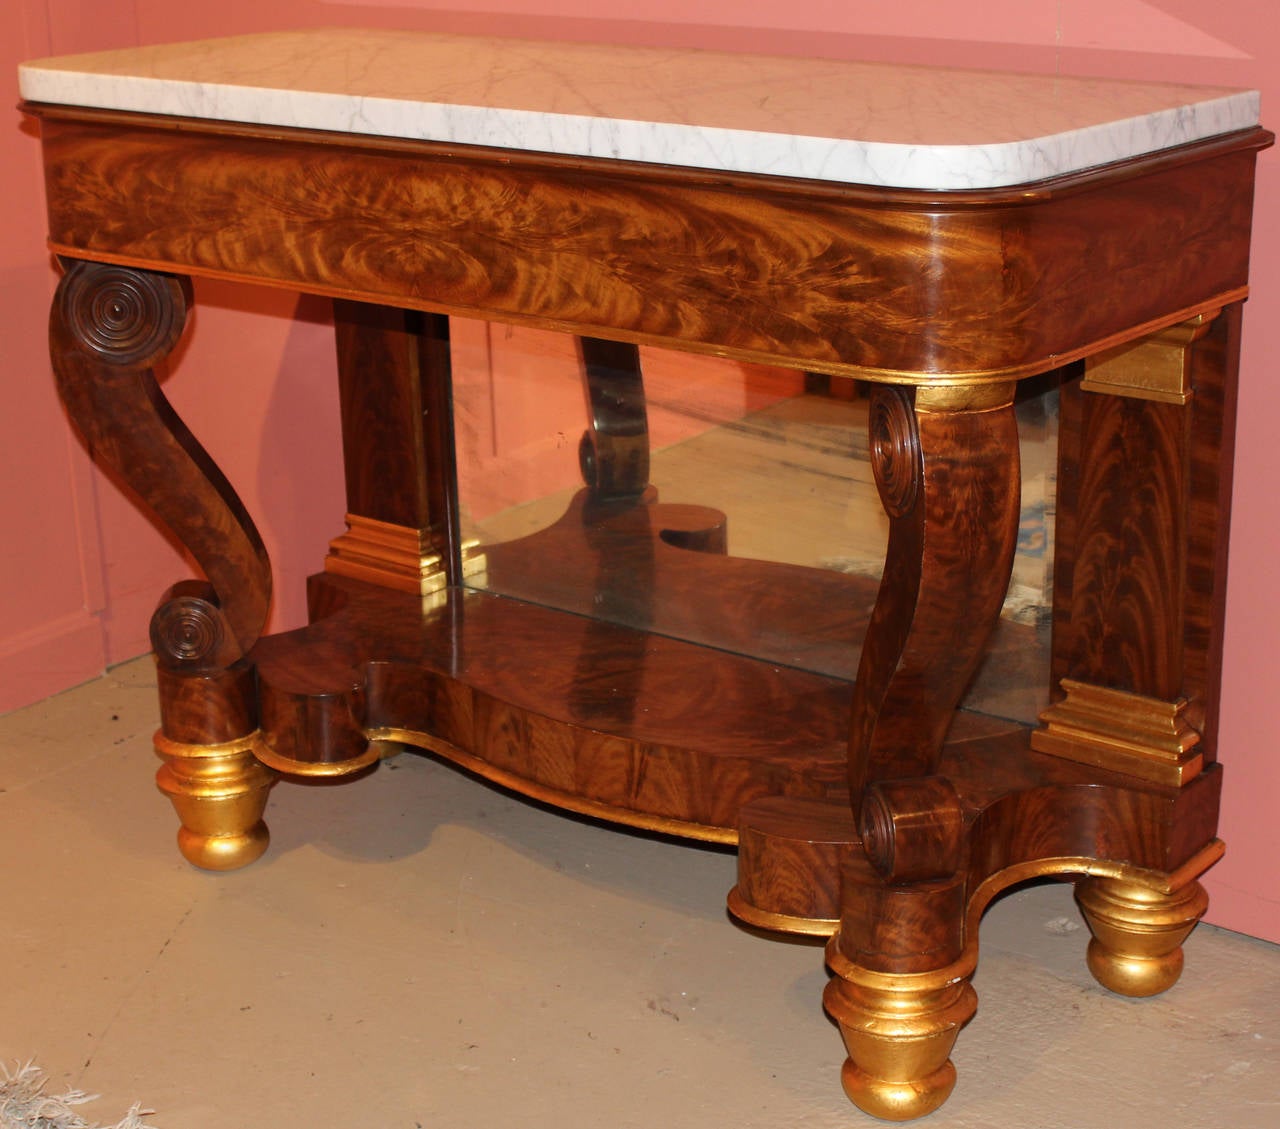 A nice example of a classical Empire pier or console table, Philadelphia circa 1825. The marble top supported by a frieze with book matched mahogany veneers above scrolled front legs and shaped apron with mirrored black plate flanked by tapered